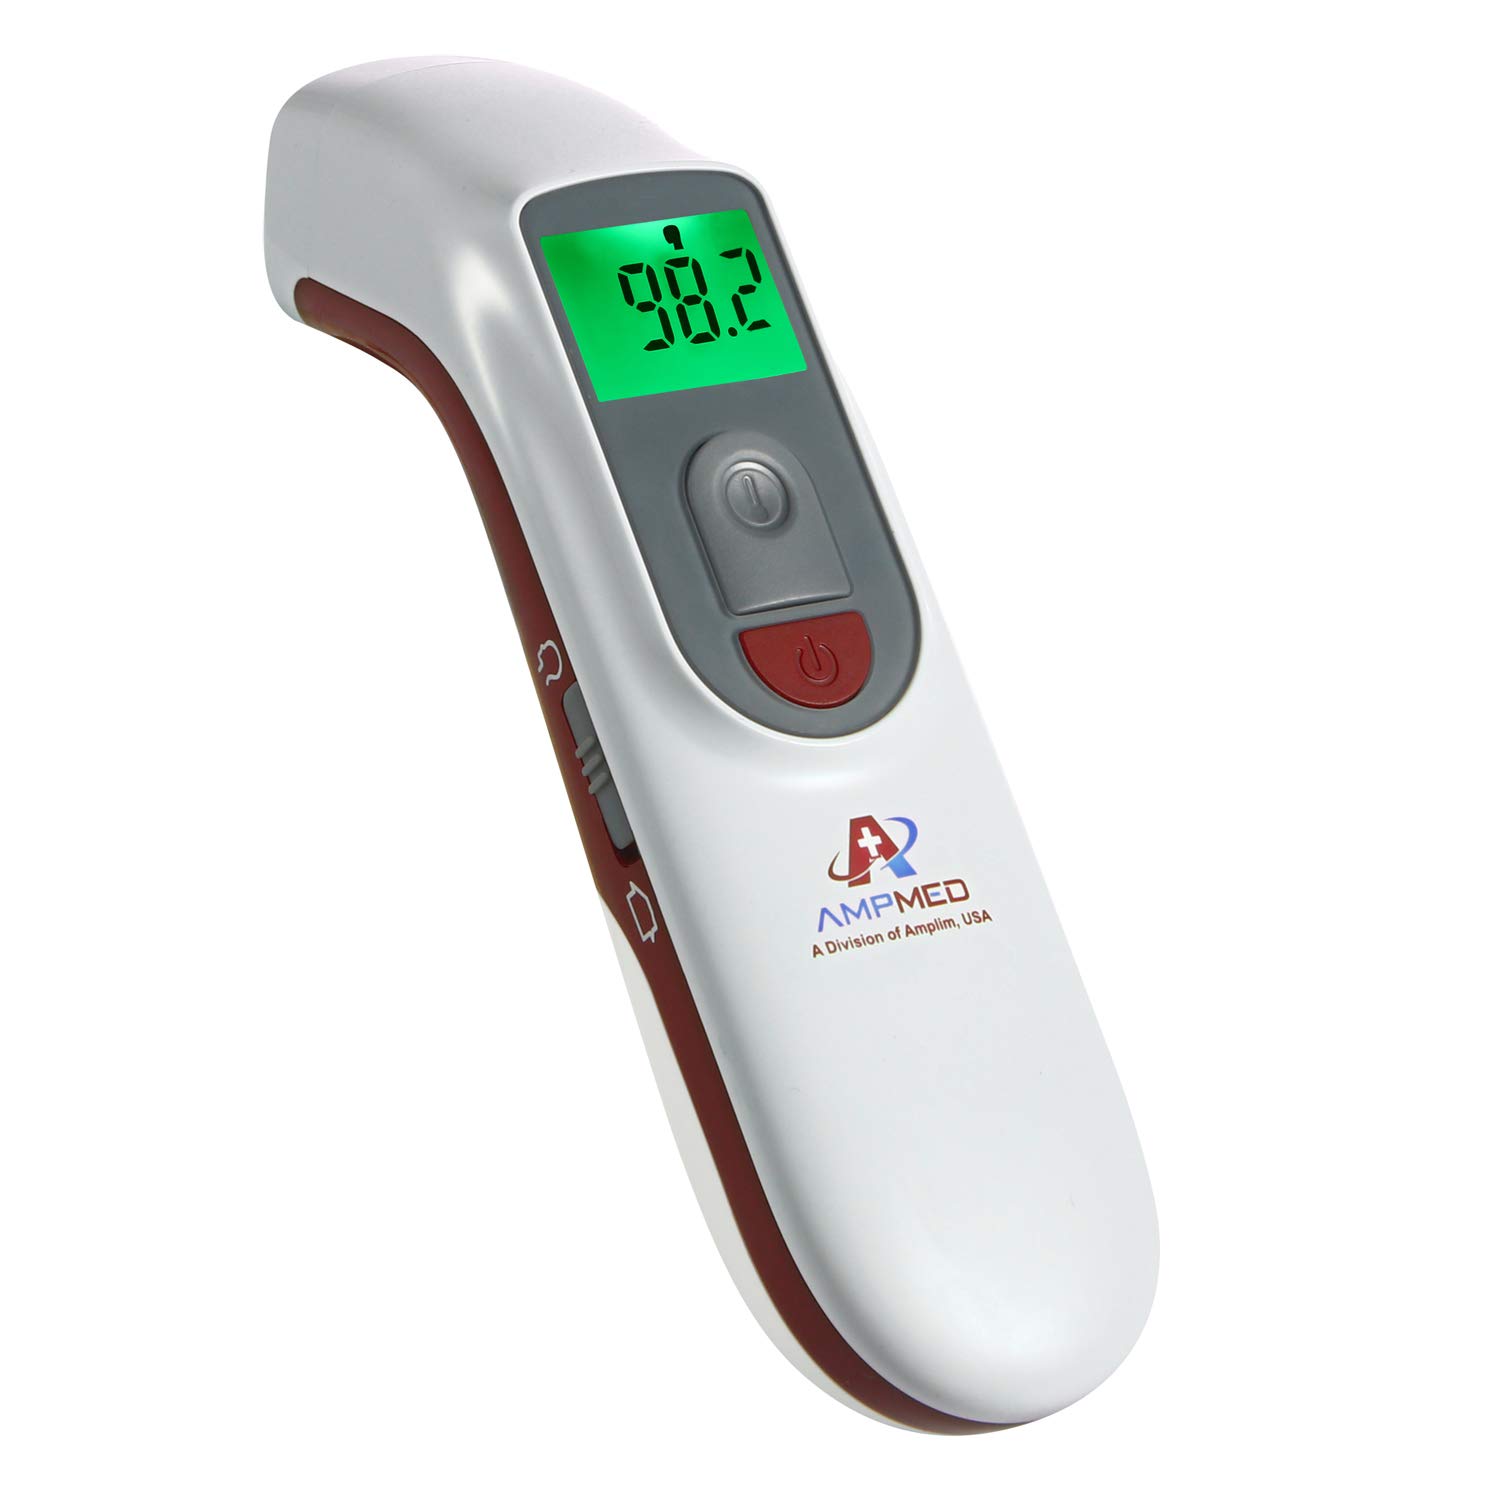 Thermometer for Adult, Forehead Thermometer No Contact Infrared